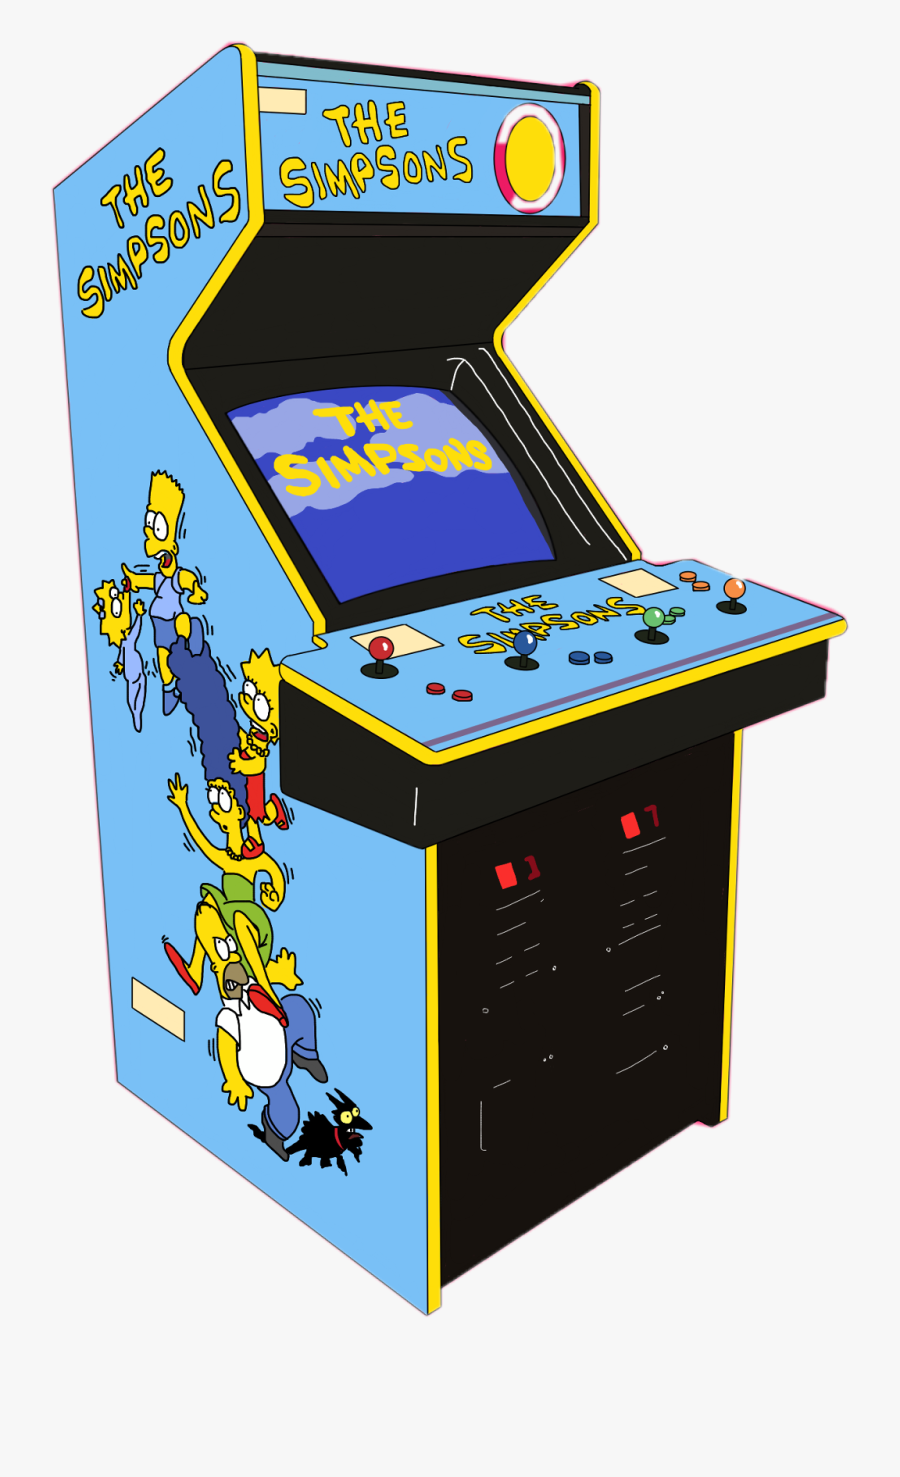 #thesimpsons #momentarilybliss #drawing #thesimpsonsdrawing - Video Game Arcade Cabinet, Transparent Clipart